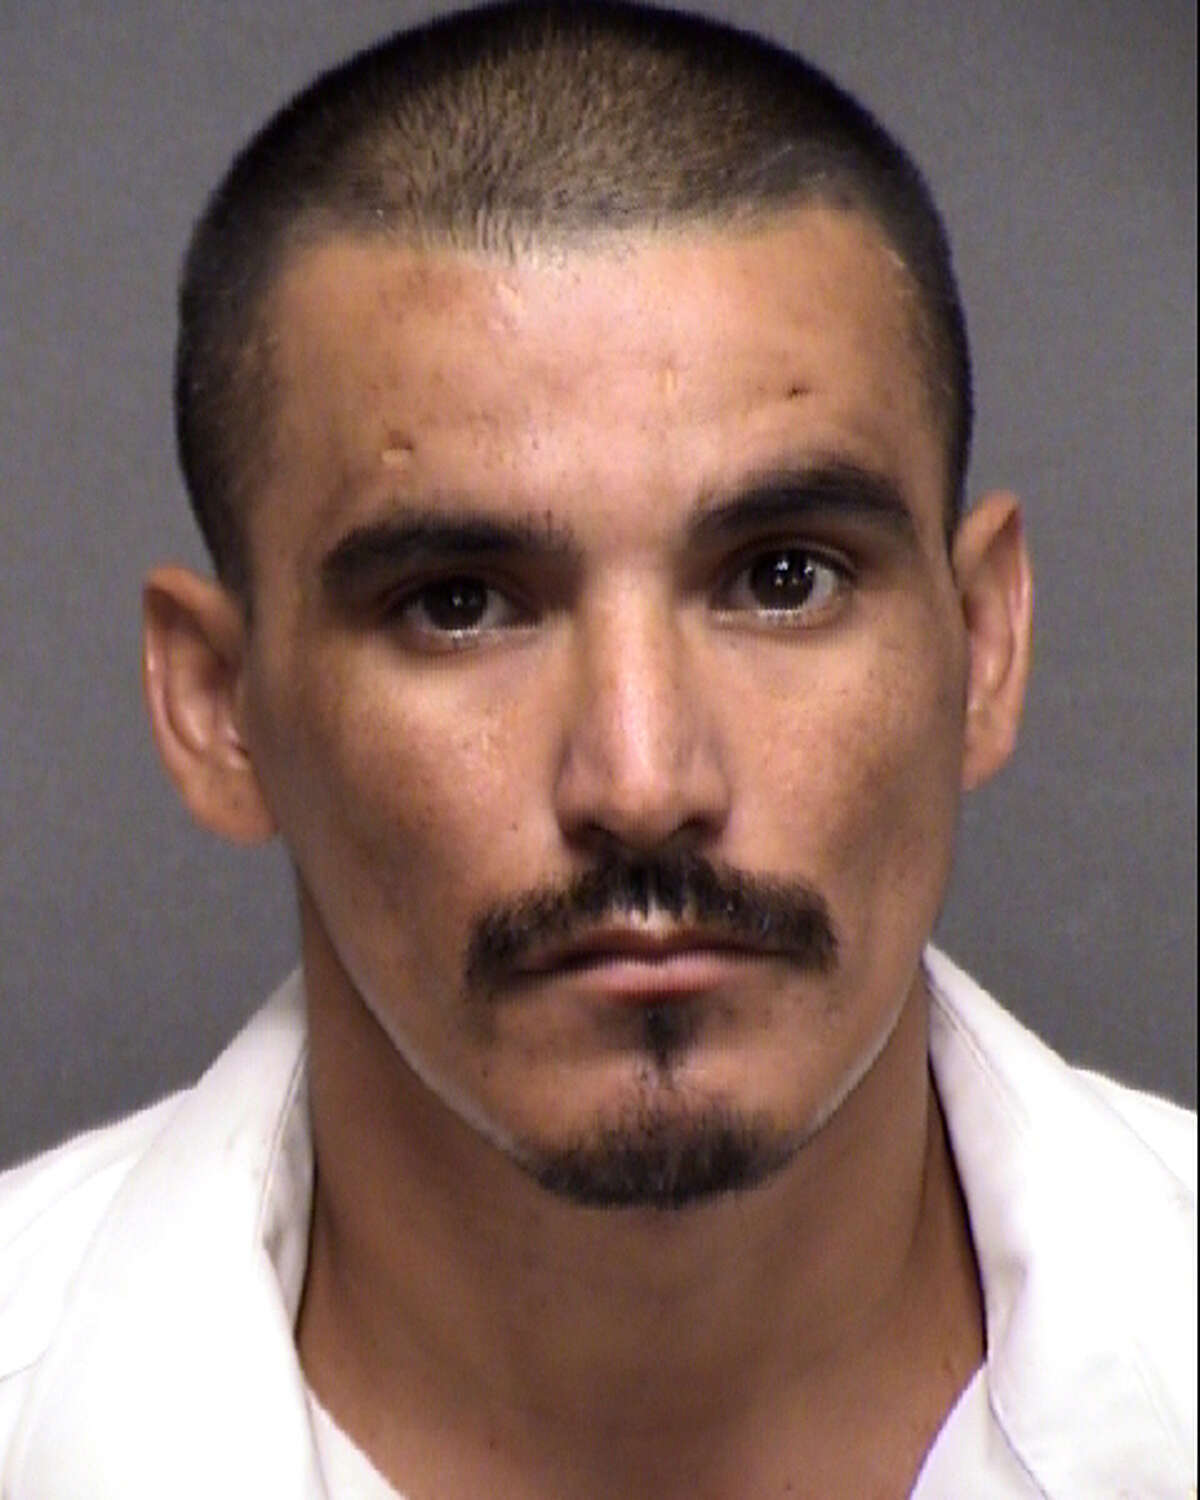 Enrique Gutierrez, 36, now faces a charge of continuous sexual abuse of a young child. He was booked into the Bexar County Jail and has been remanded without bond.